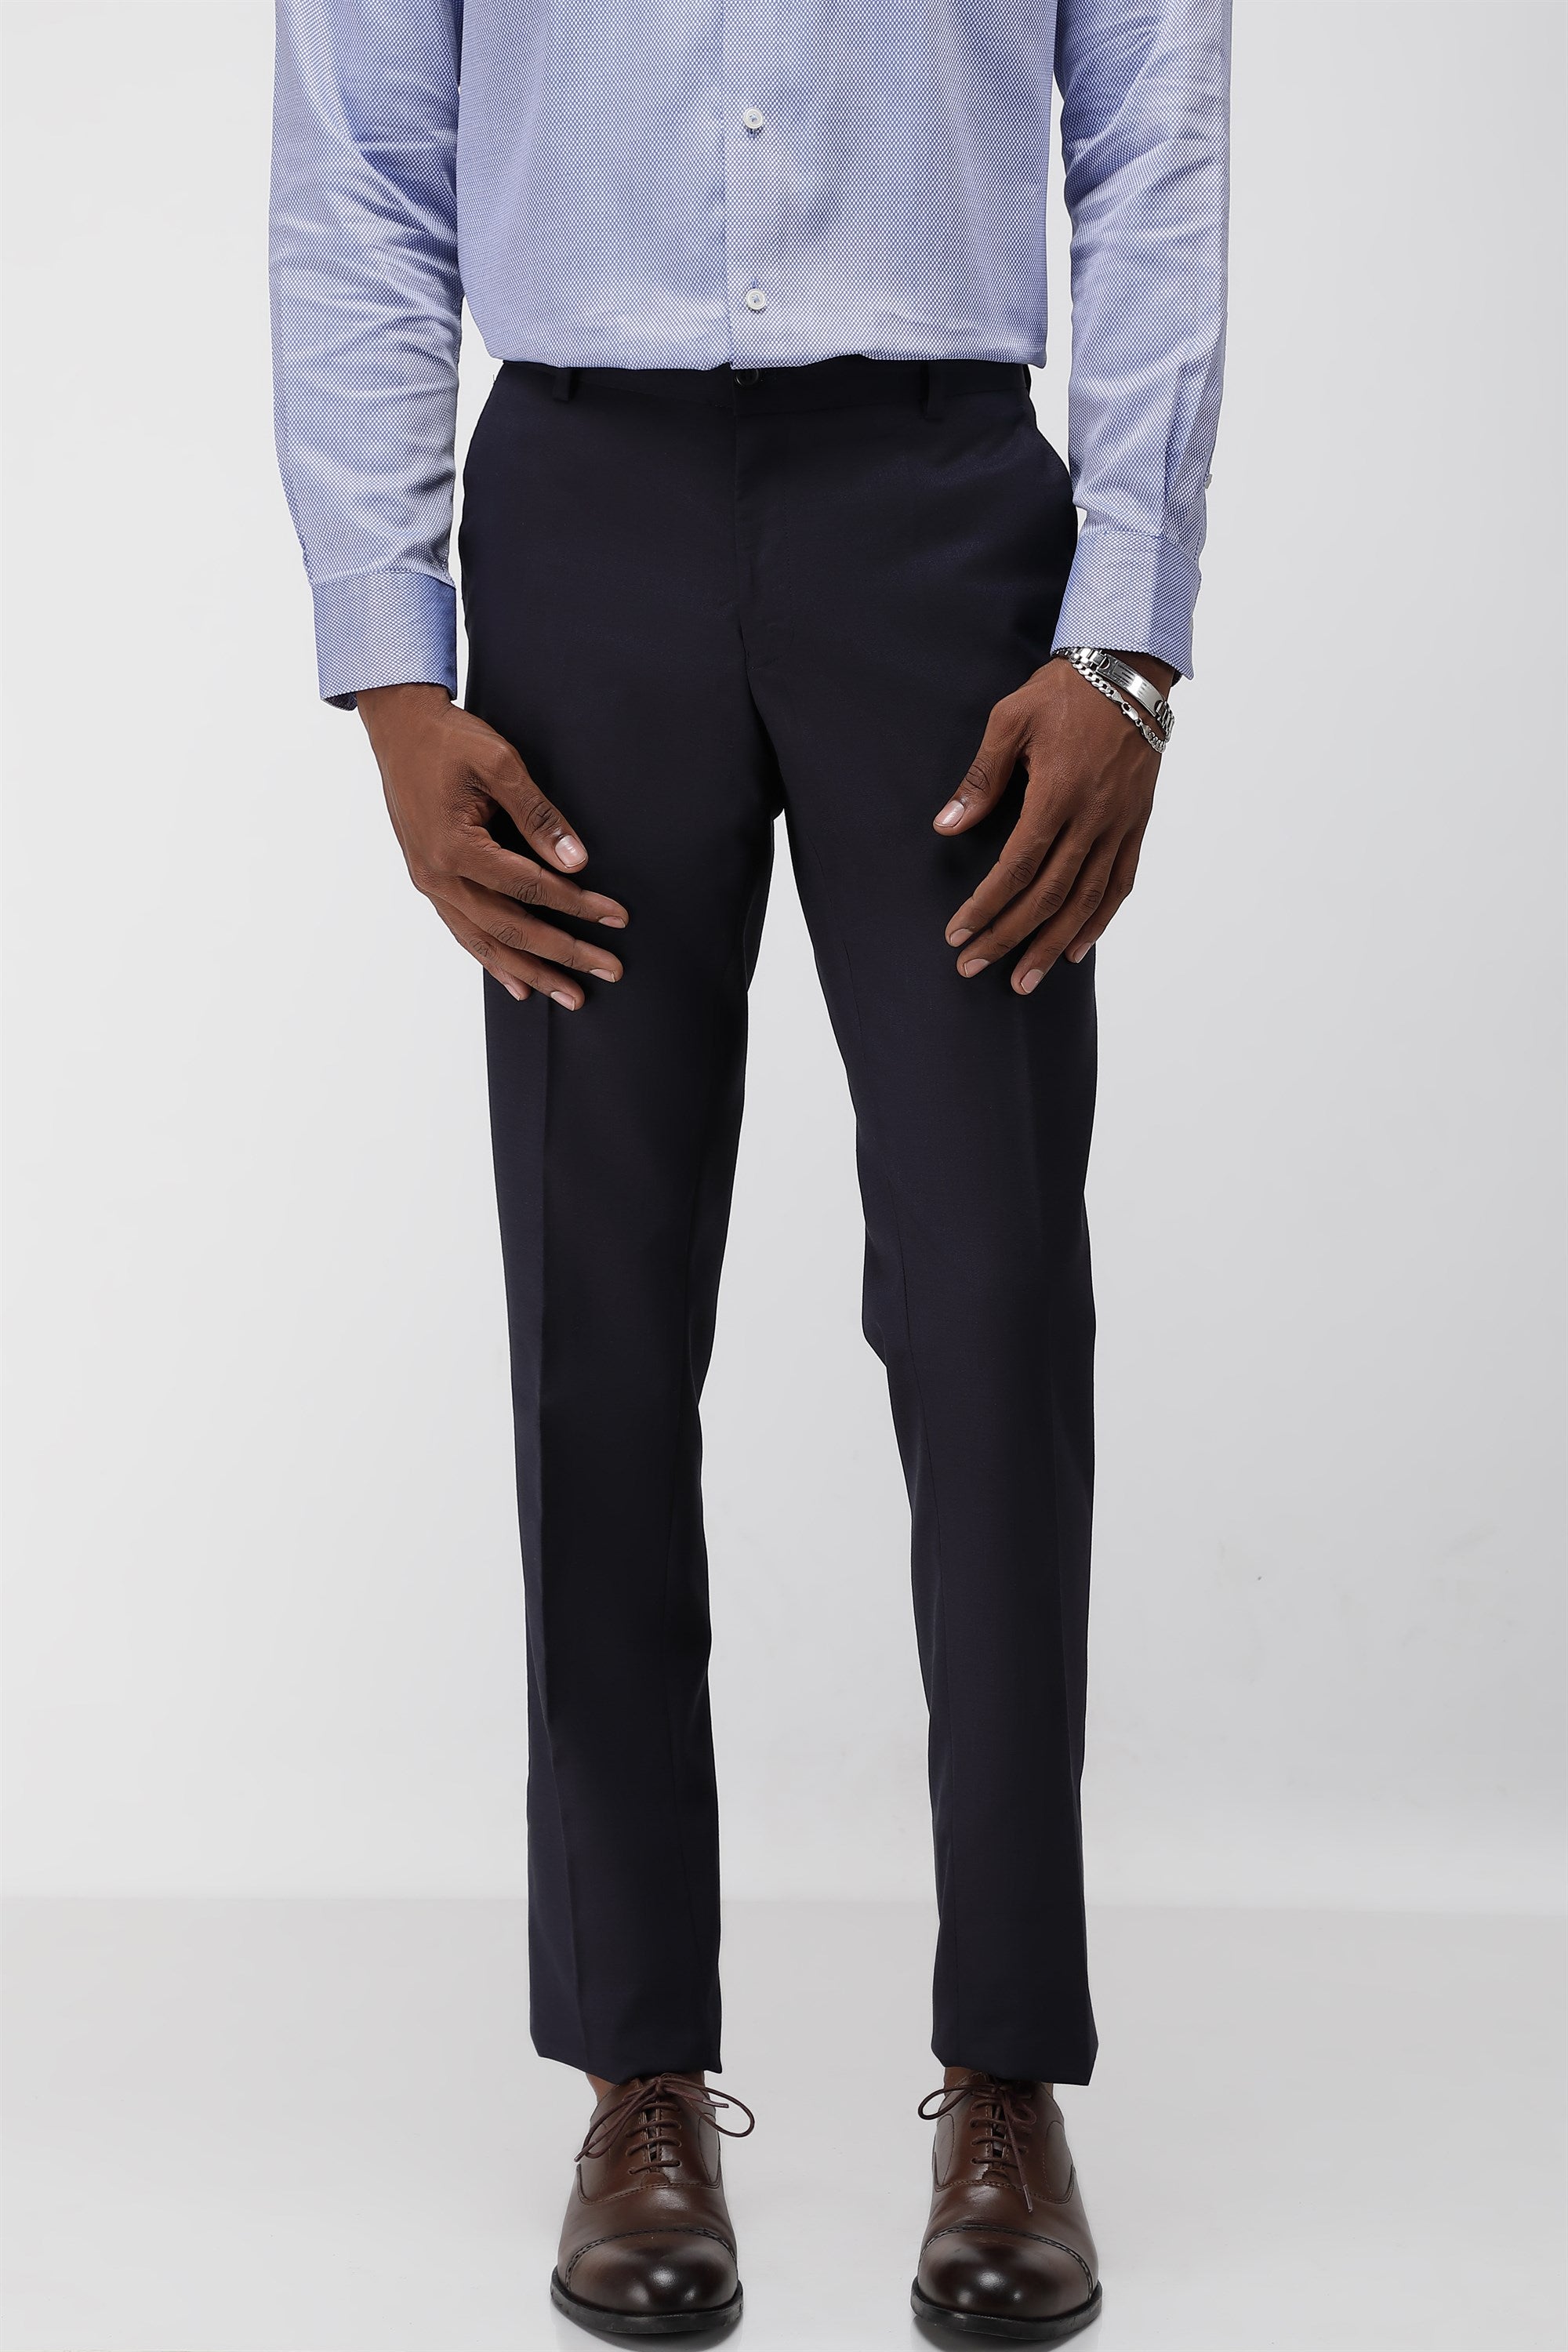 T the brand Stretch Formal Flat Front Trouser - Navy Blue